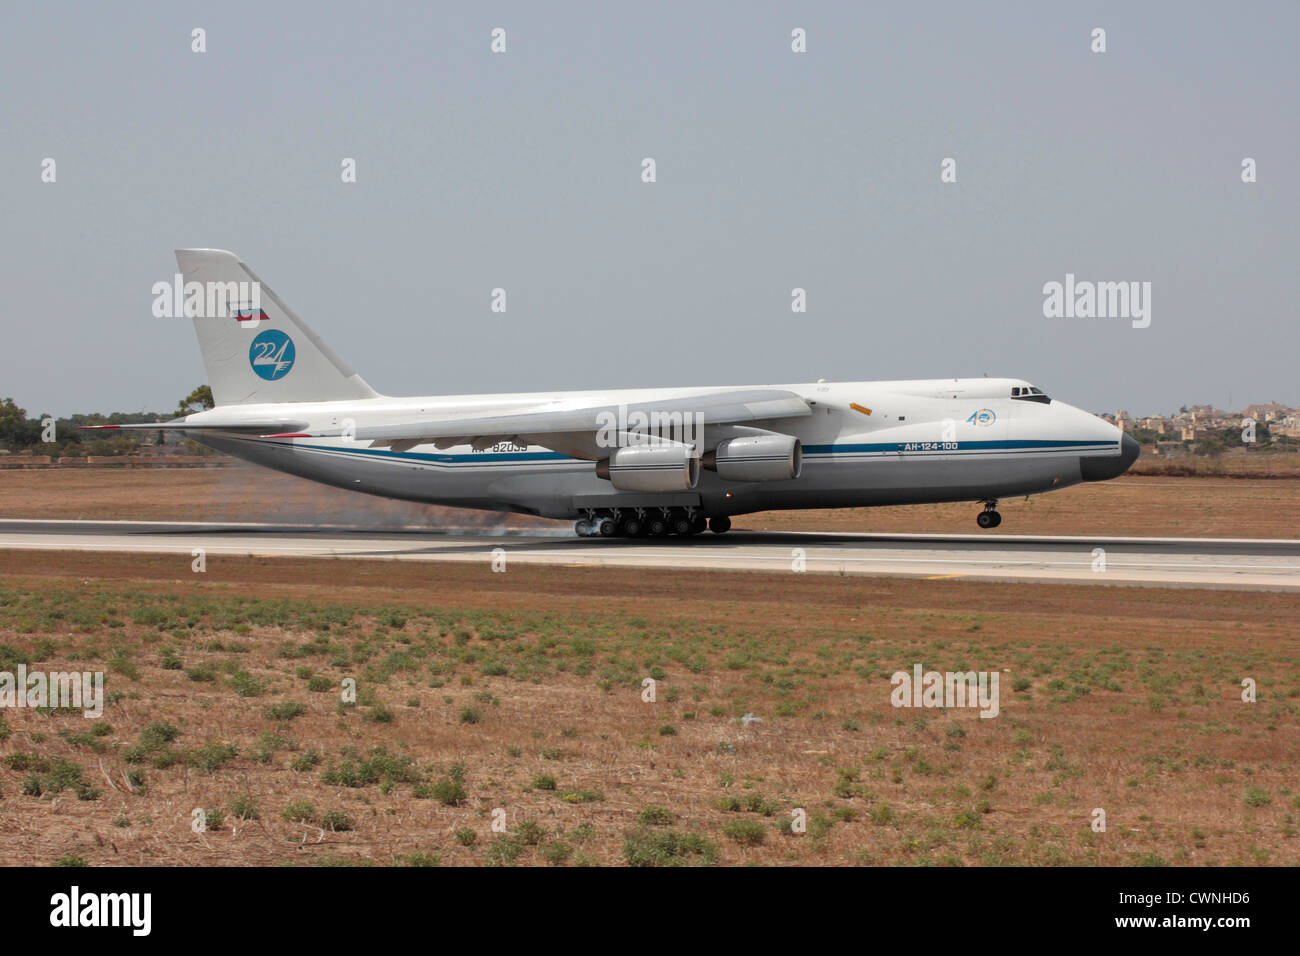 Antonov An-124 Ruslan heavy cargo jet of the Russian Air Force touching down on arrival in Malta Stock Photo